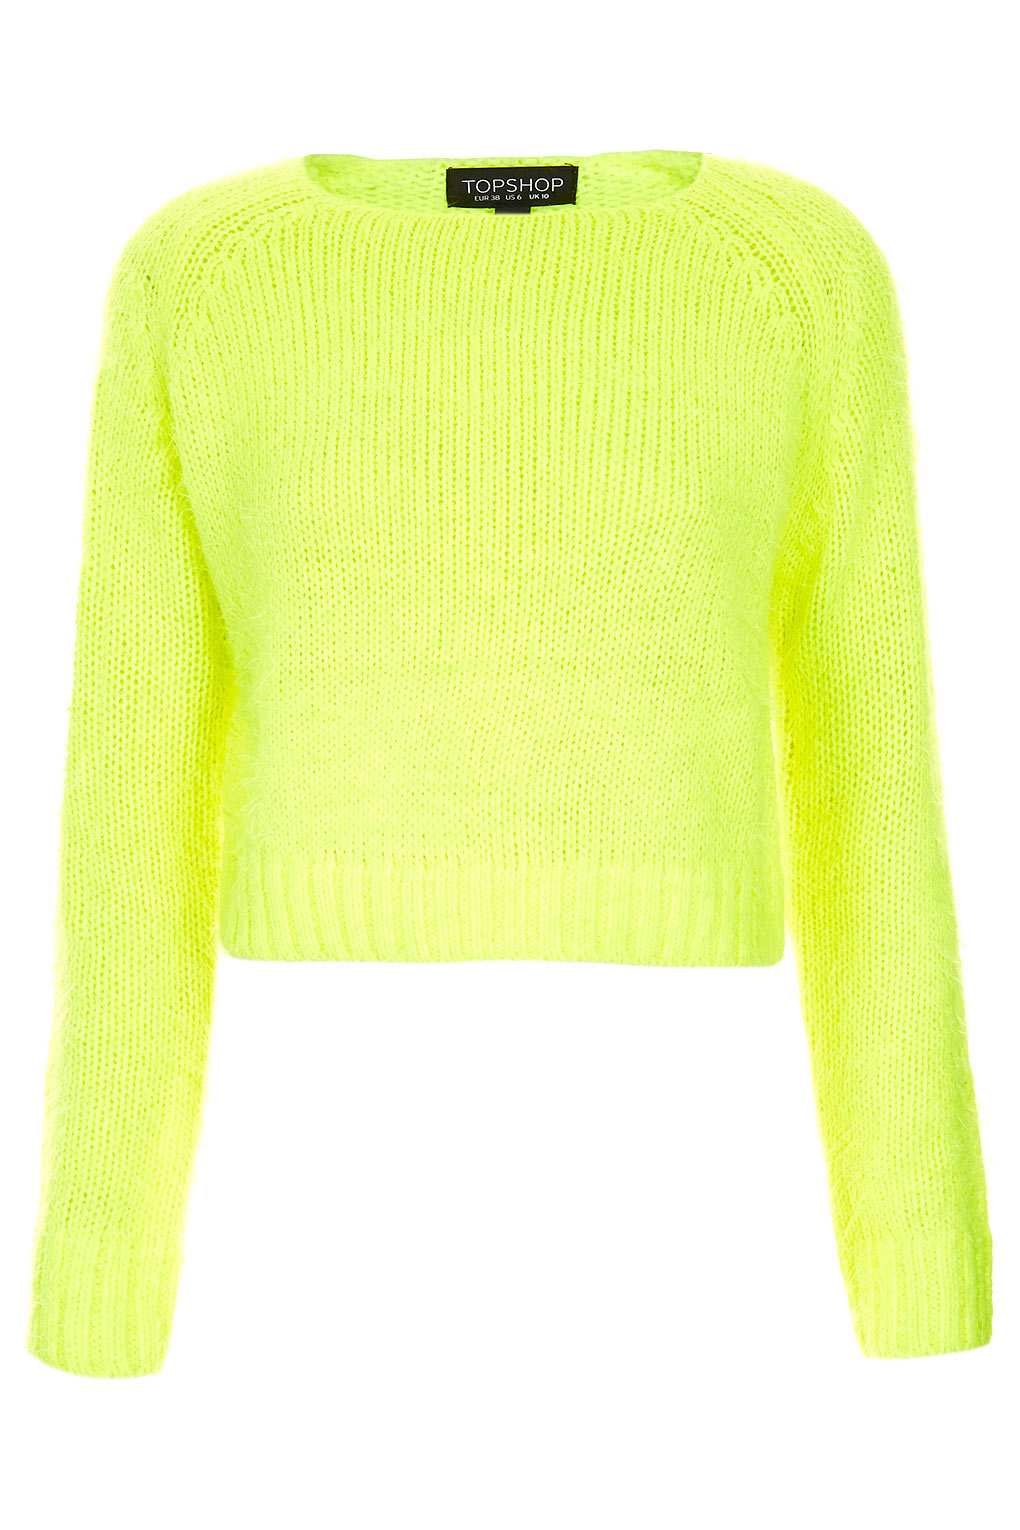 Lyst - Topshop Knitted Fluffy Crop Jumper in Yellow